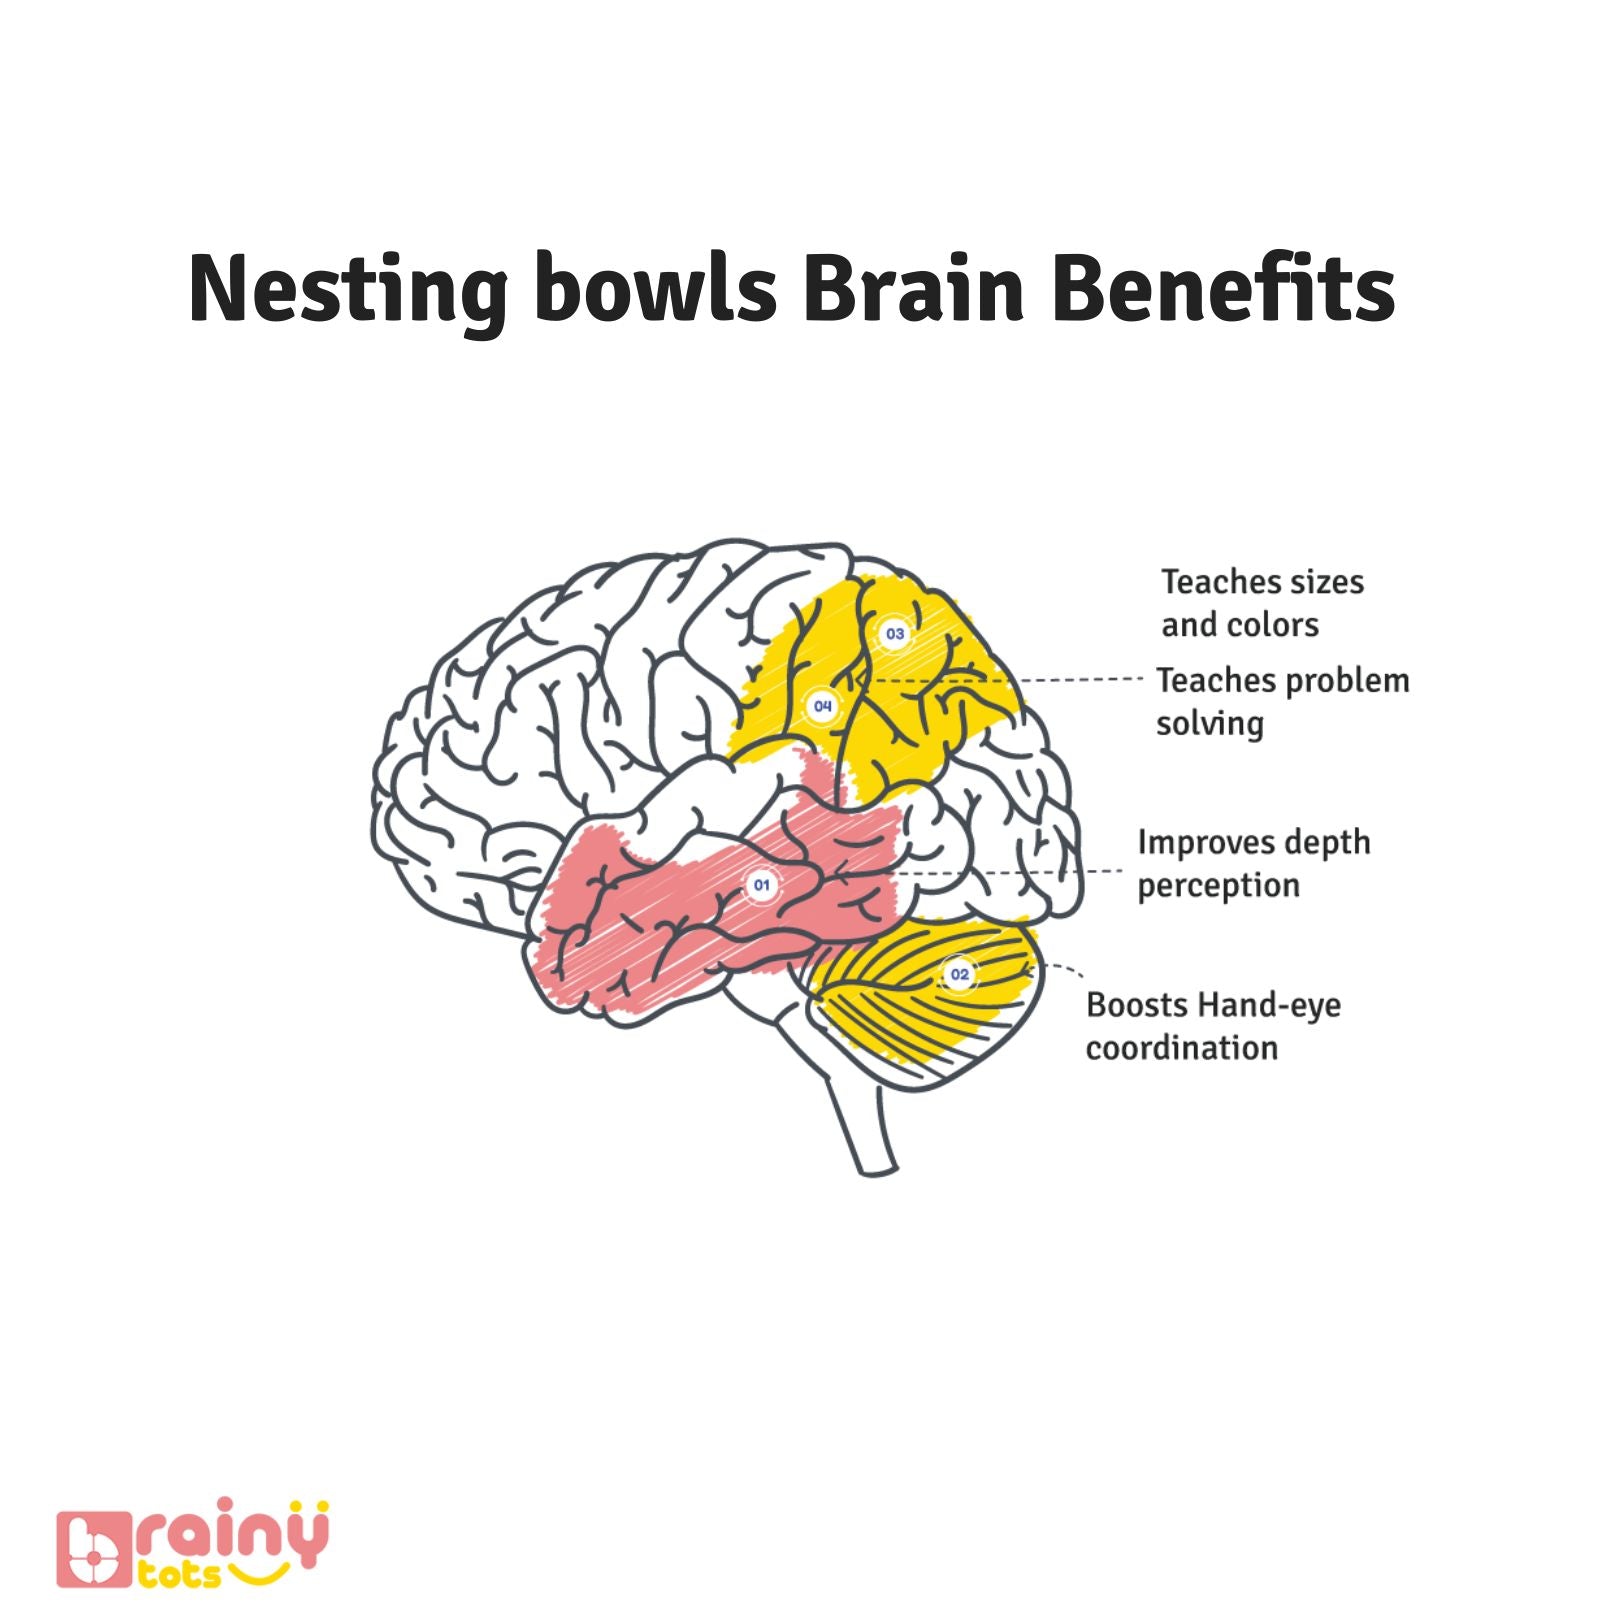 Our nesting bowls offer significant brain benefits for babies aged 6 months and up. They promote problem-solving skills, fine motor abilities, and cognitive development. These Montessori toys, made from safe and durable materials, are perfect for stacking, sorting, and sensory exploration. Ideal for early learning and interactive play.